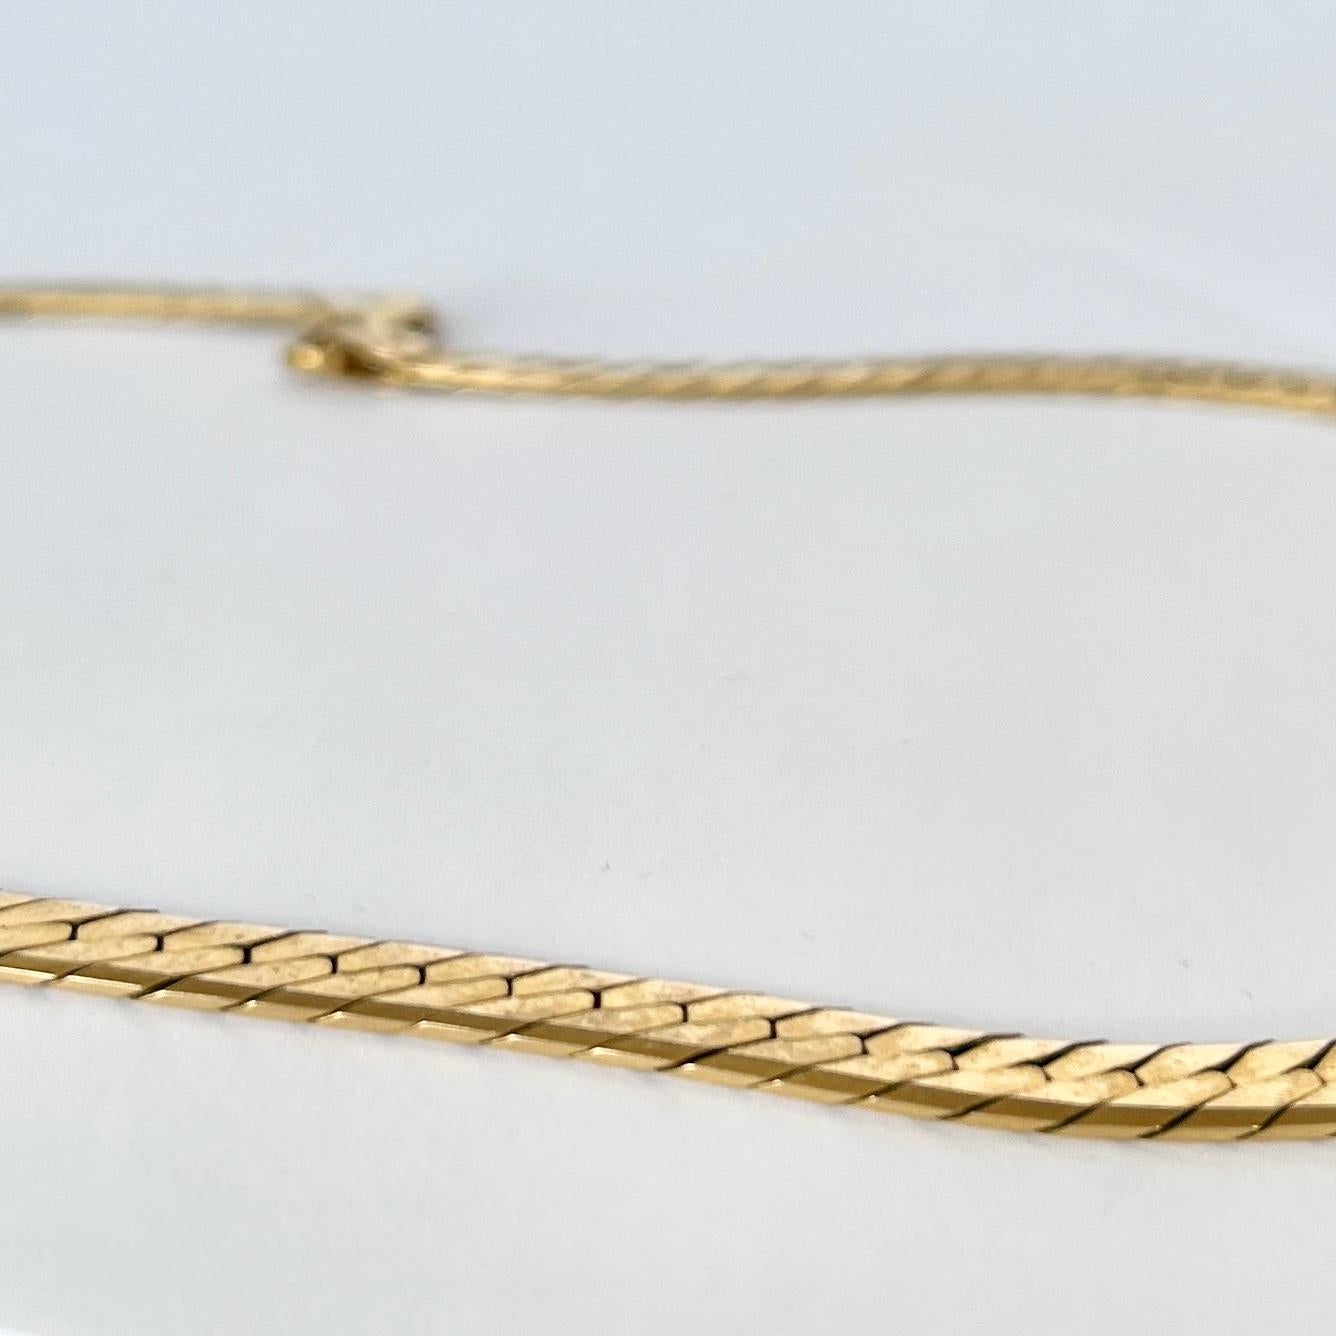 This beautiful vintage 9ct gold collar is flat and sits beautifully. It is fastened using a simple clasp.

Length: 40.5cm
Width: 6mm 

Weight: 19.9g